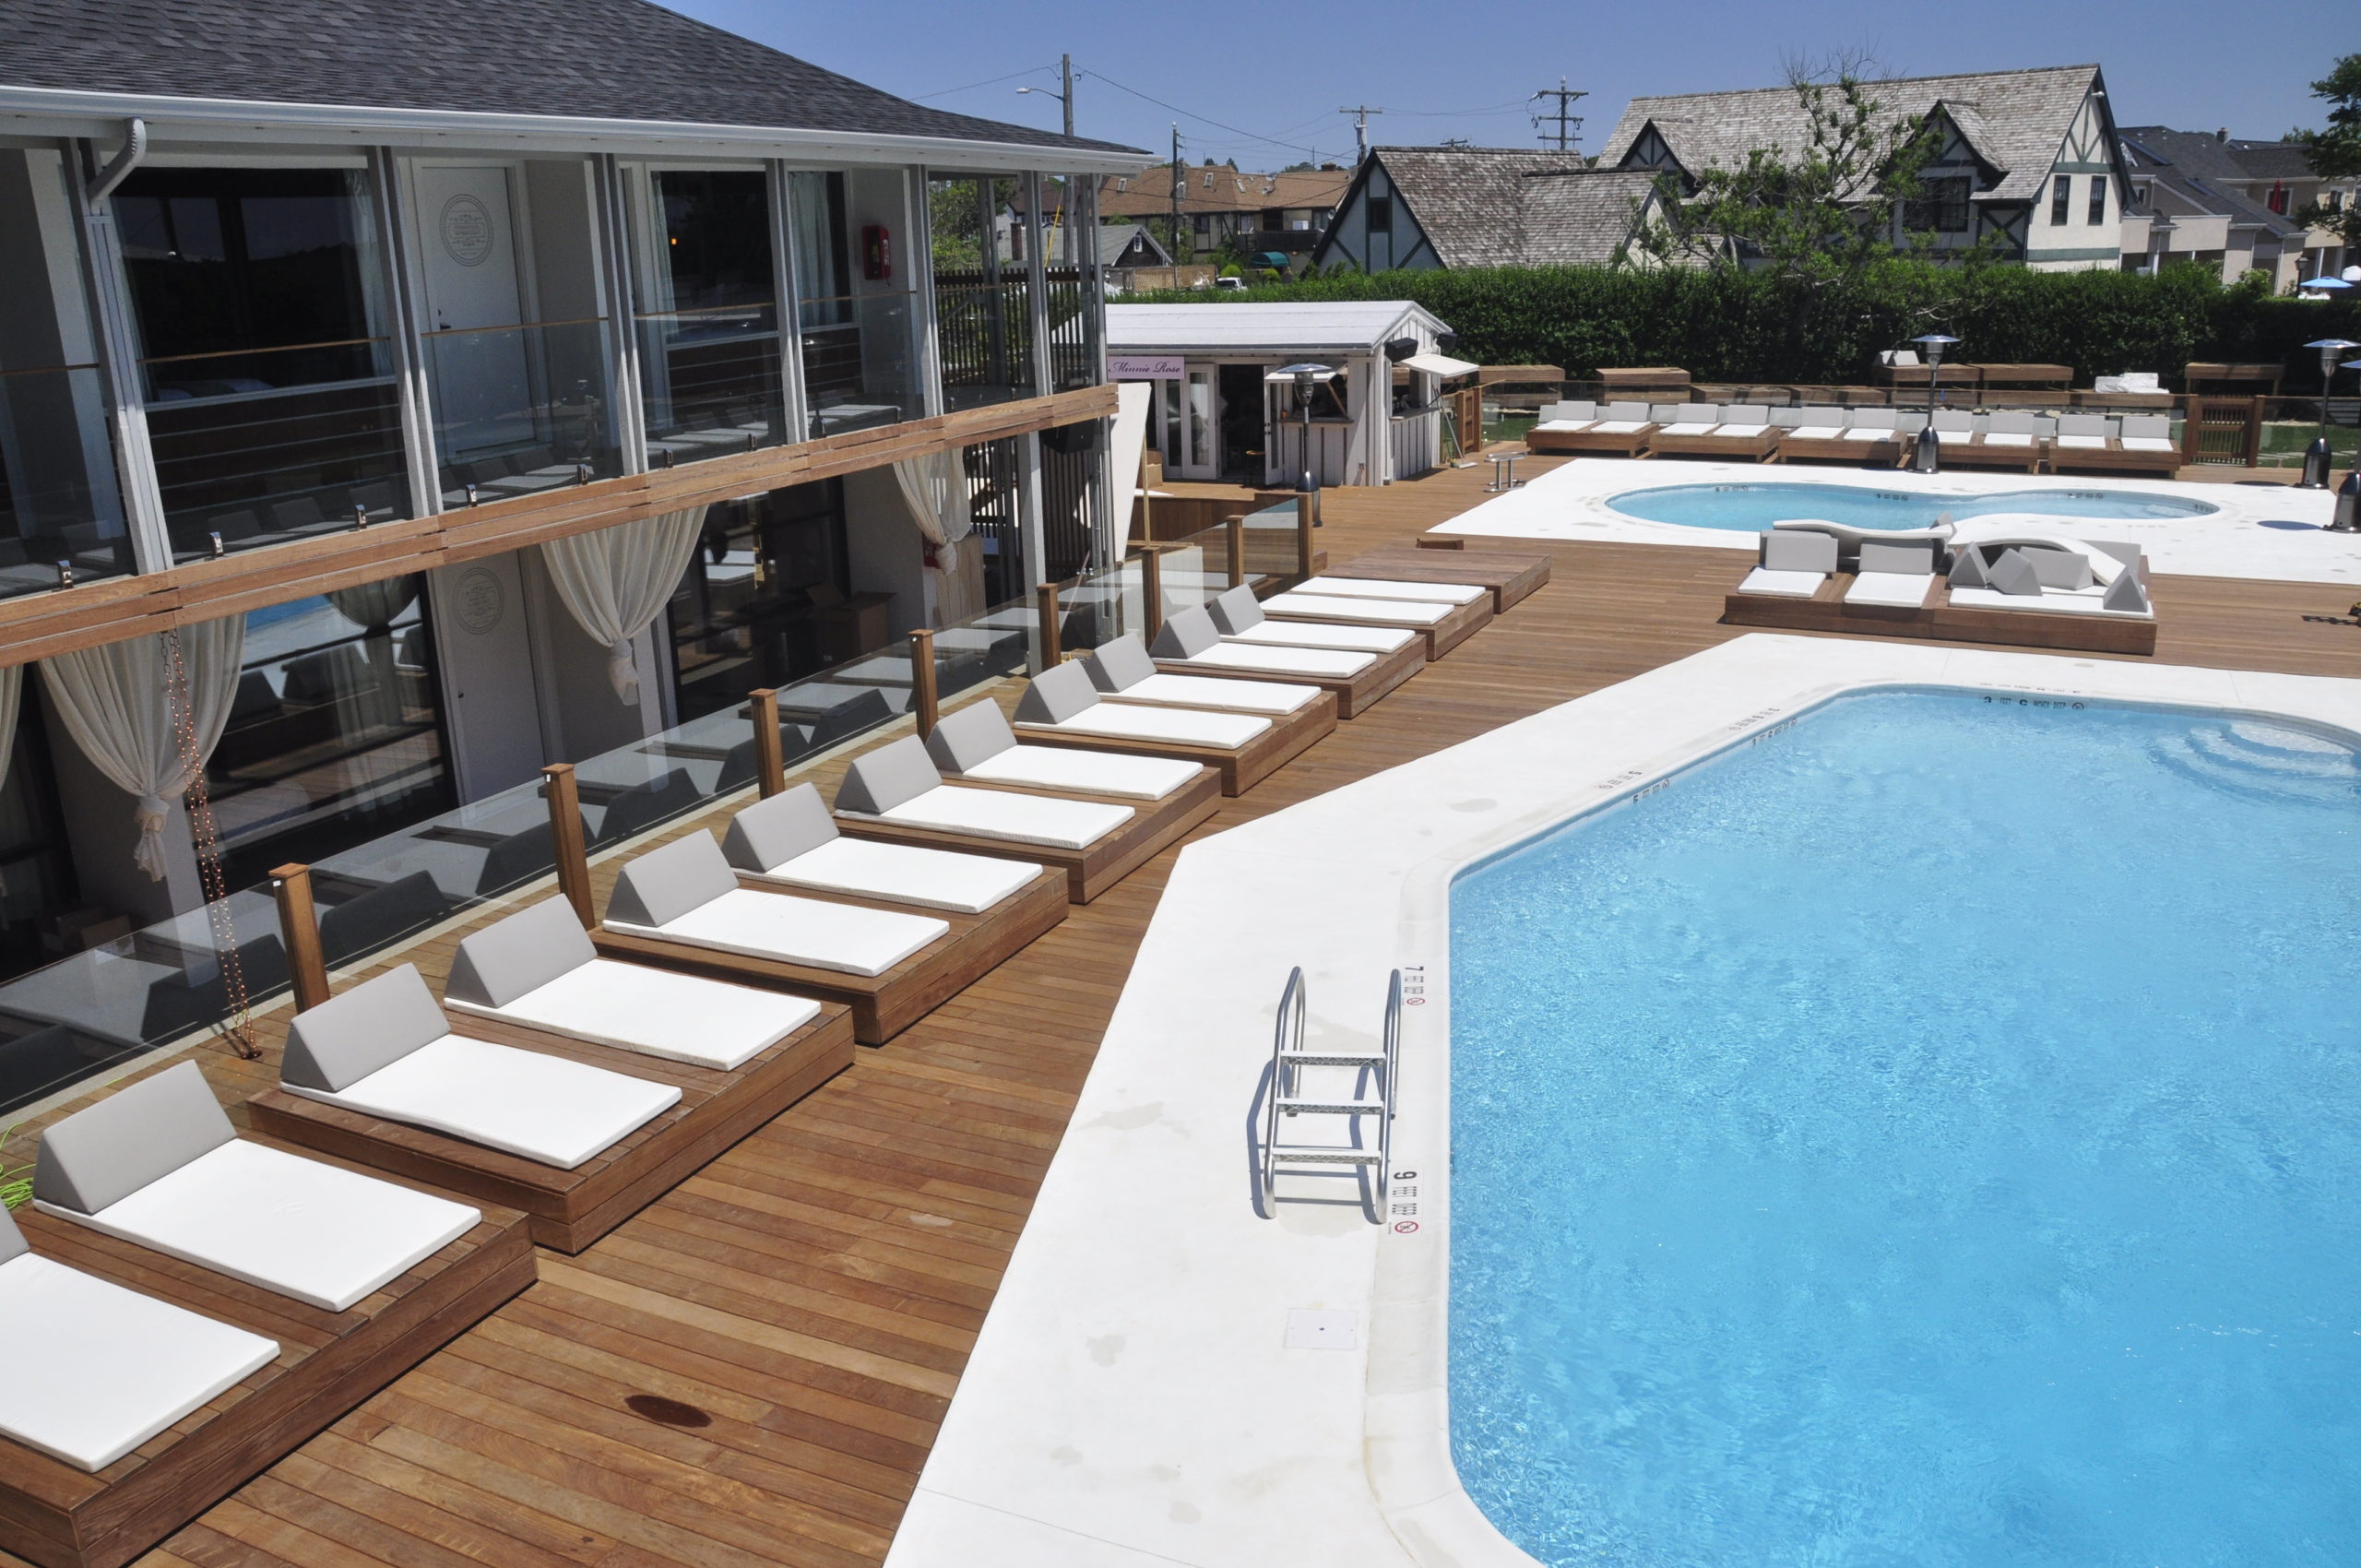 The pool at the Montauk Beach House.  PRESS FILE